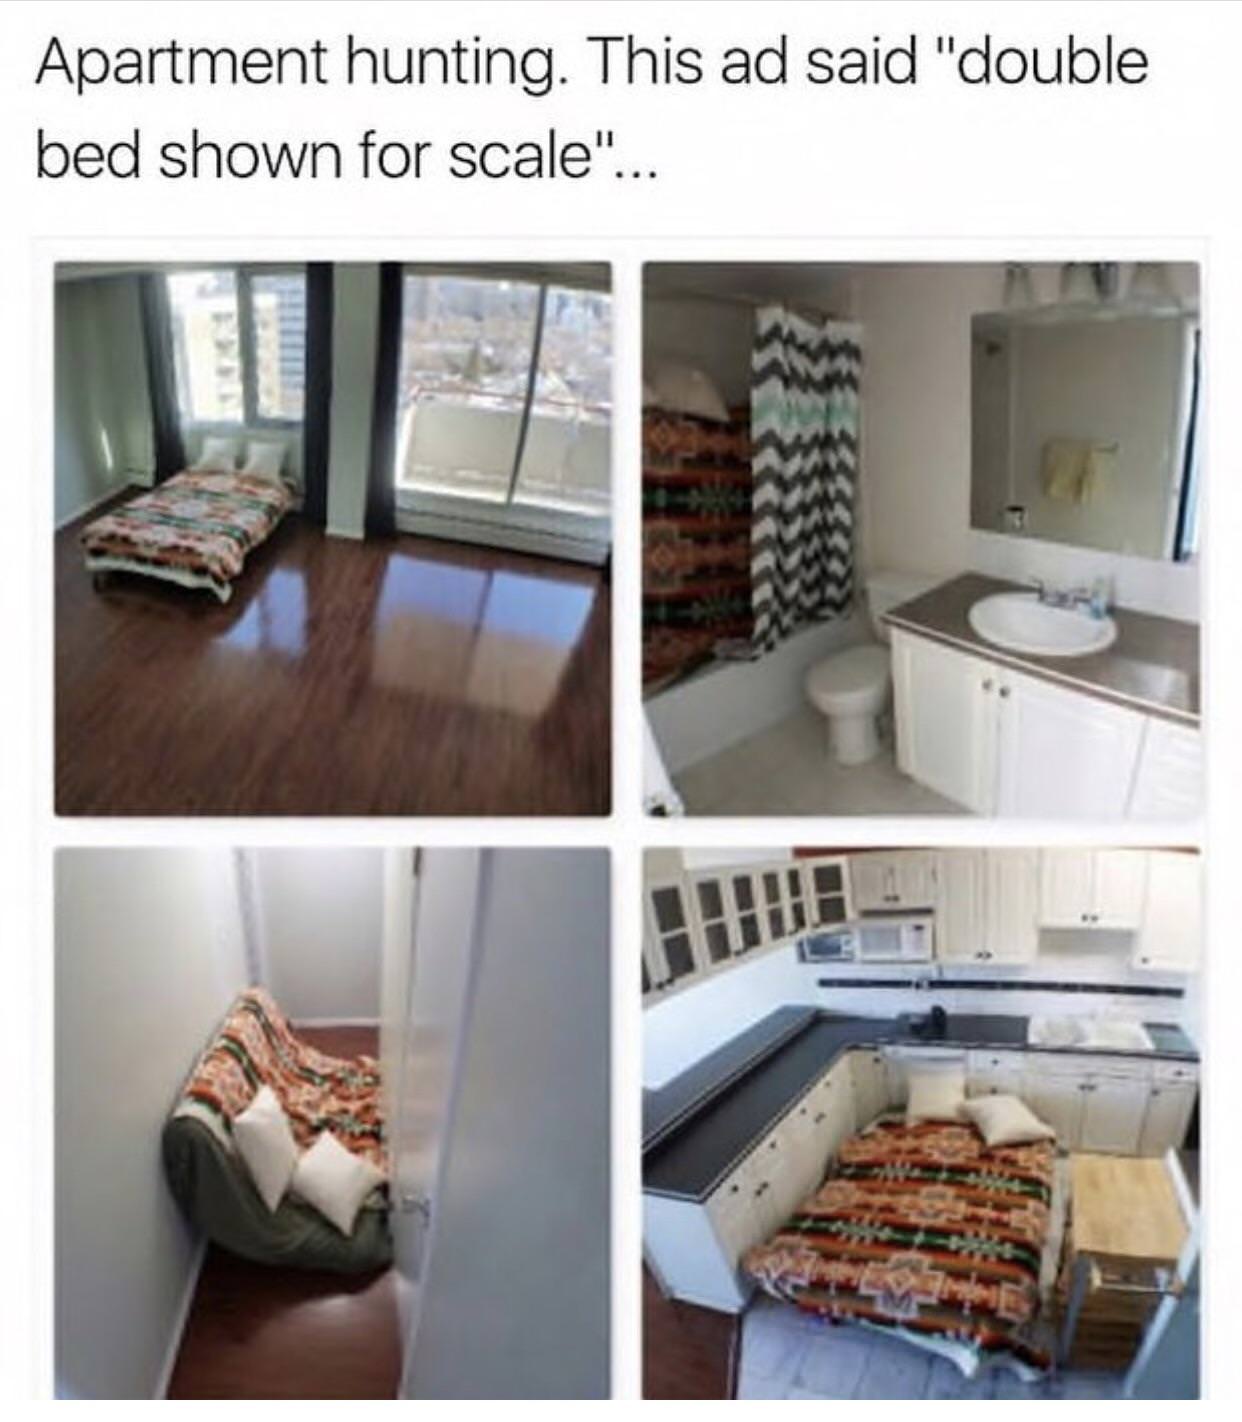 apartment hunting this ad said double bed shown for scale - Apartment hunting. This ad said "double bed shown for scale"...